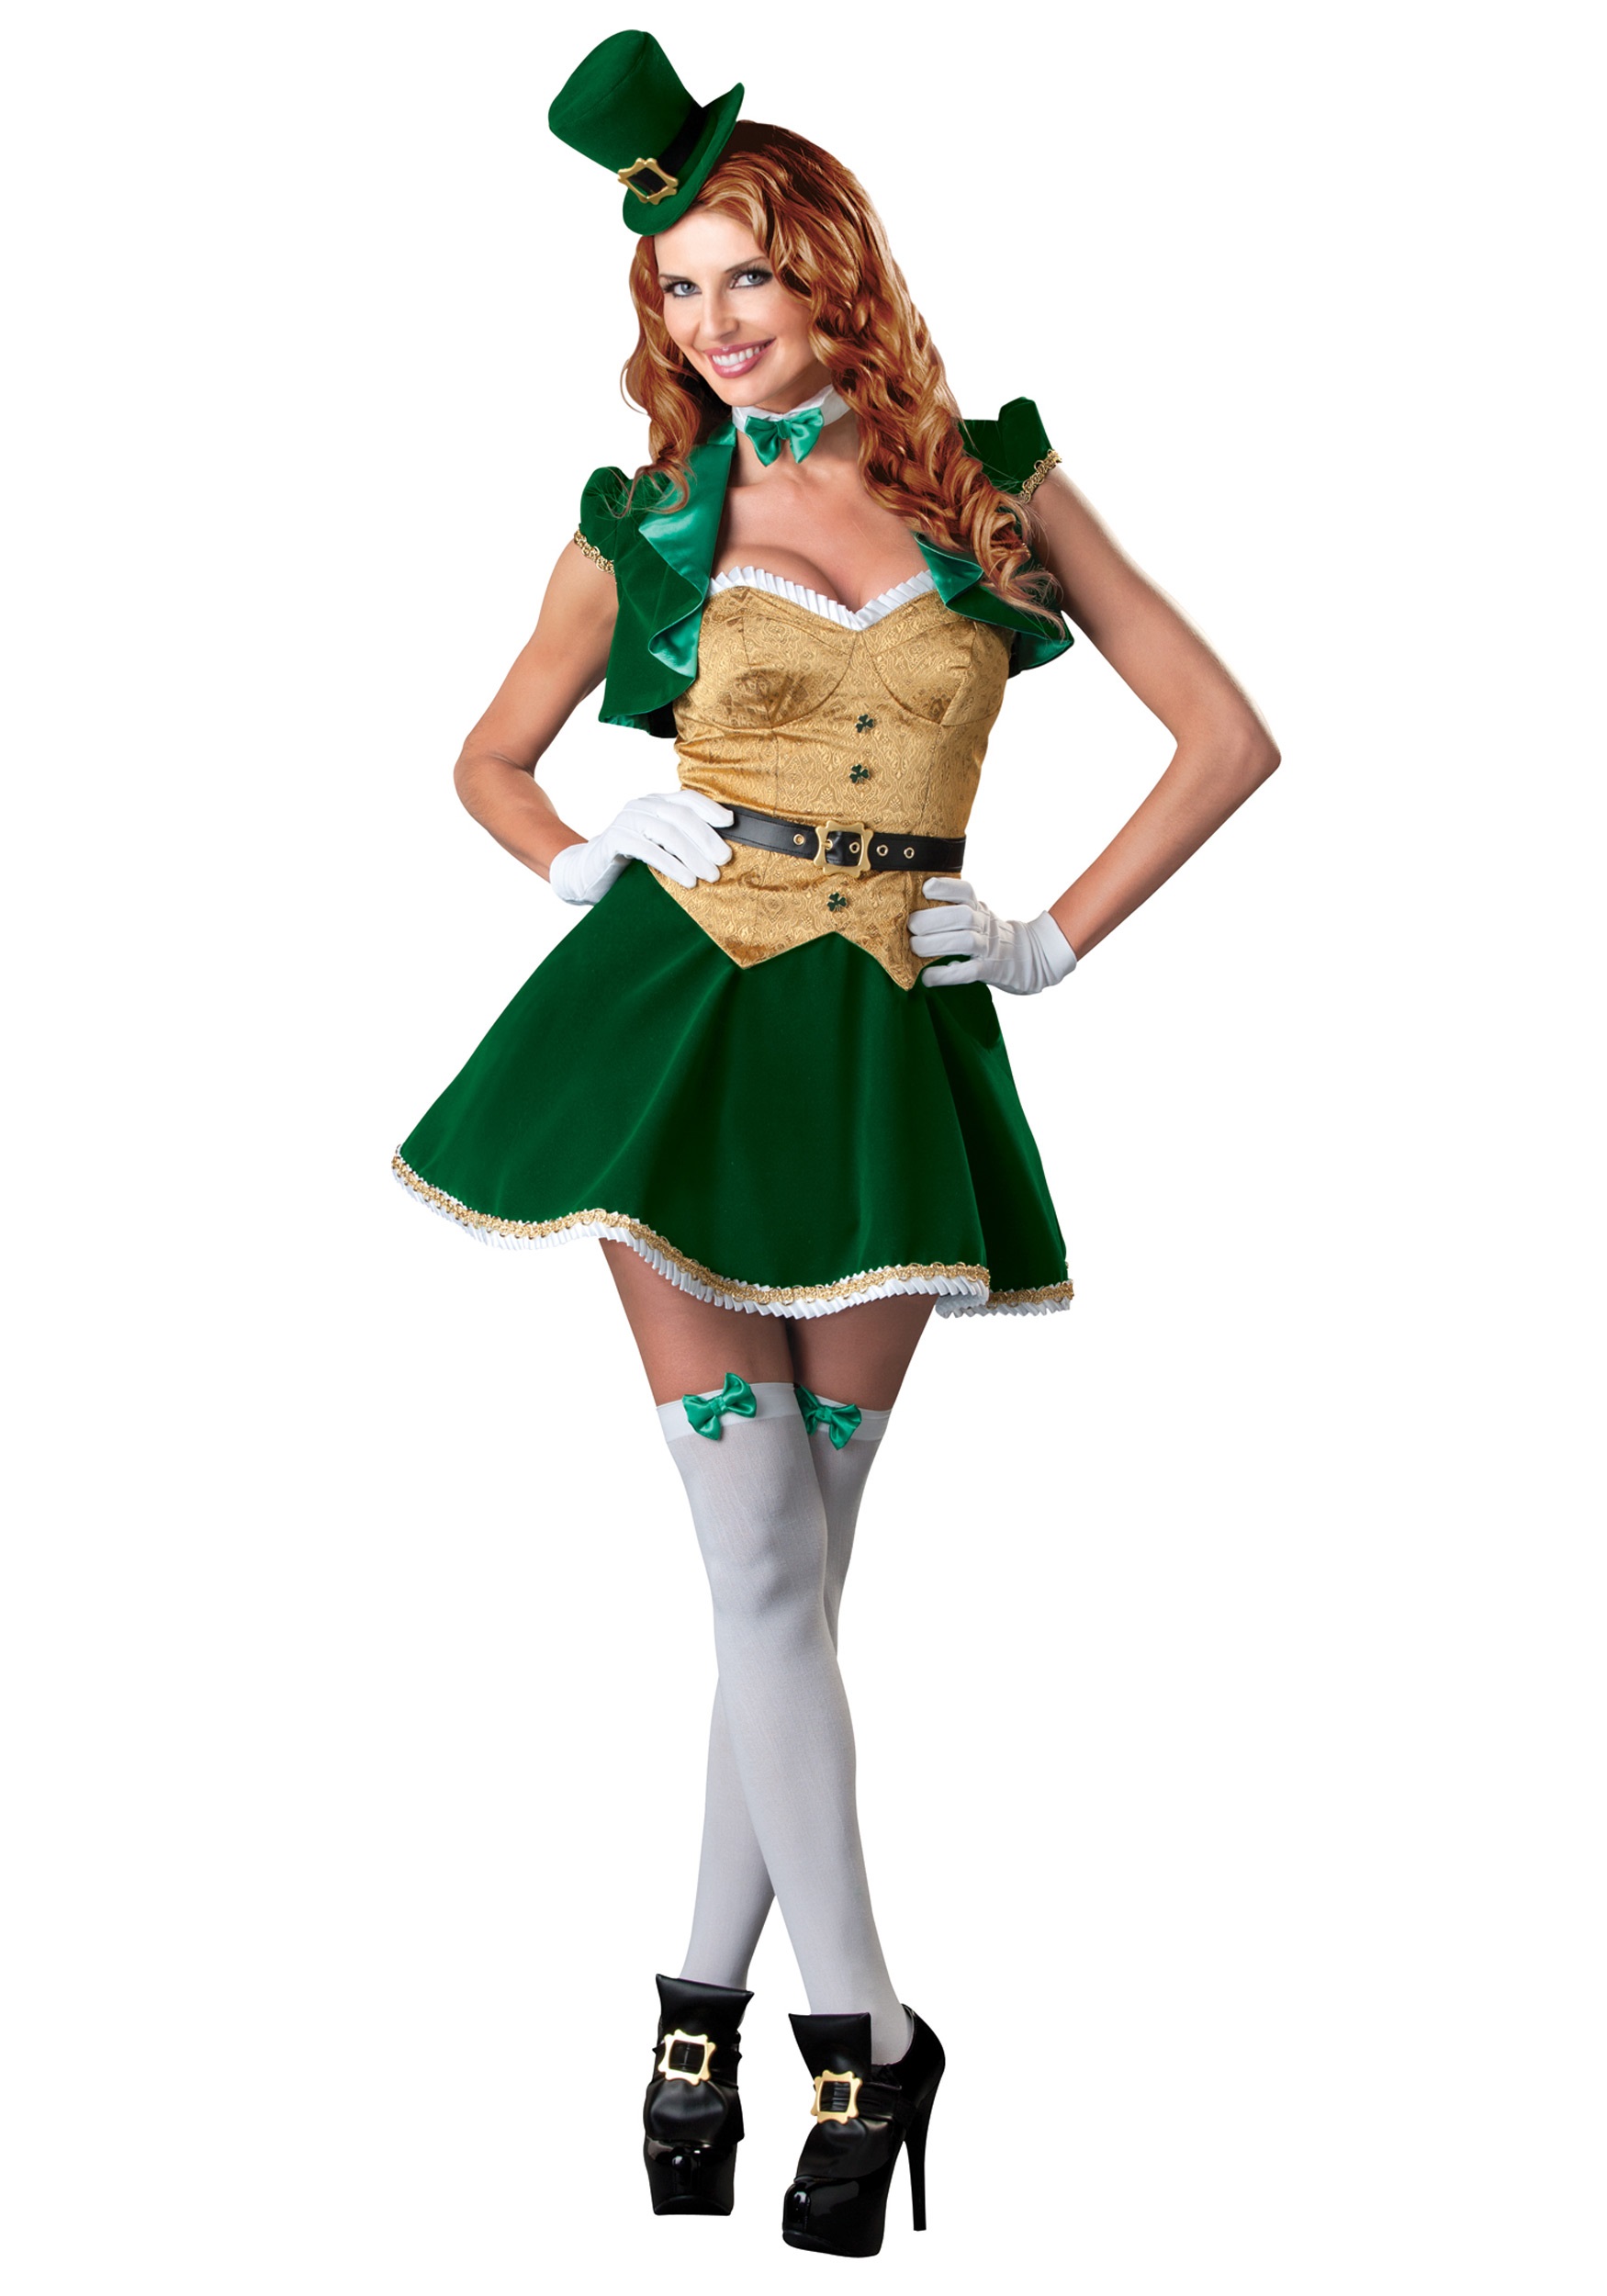 Make your luck change for the better in this sexy lucky lass costume. 